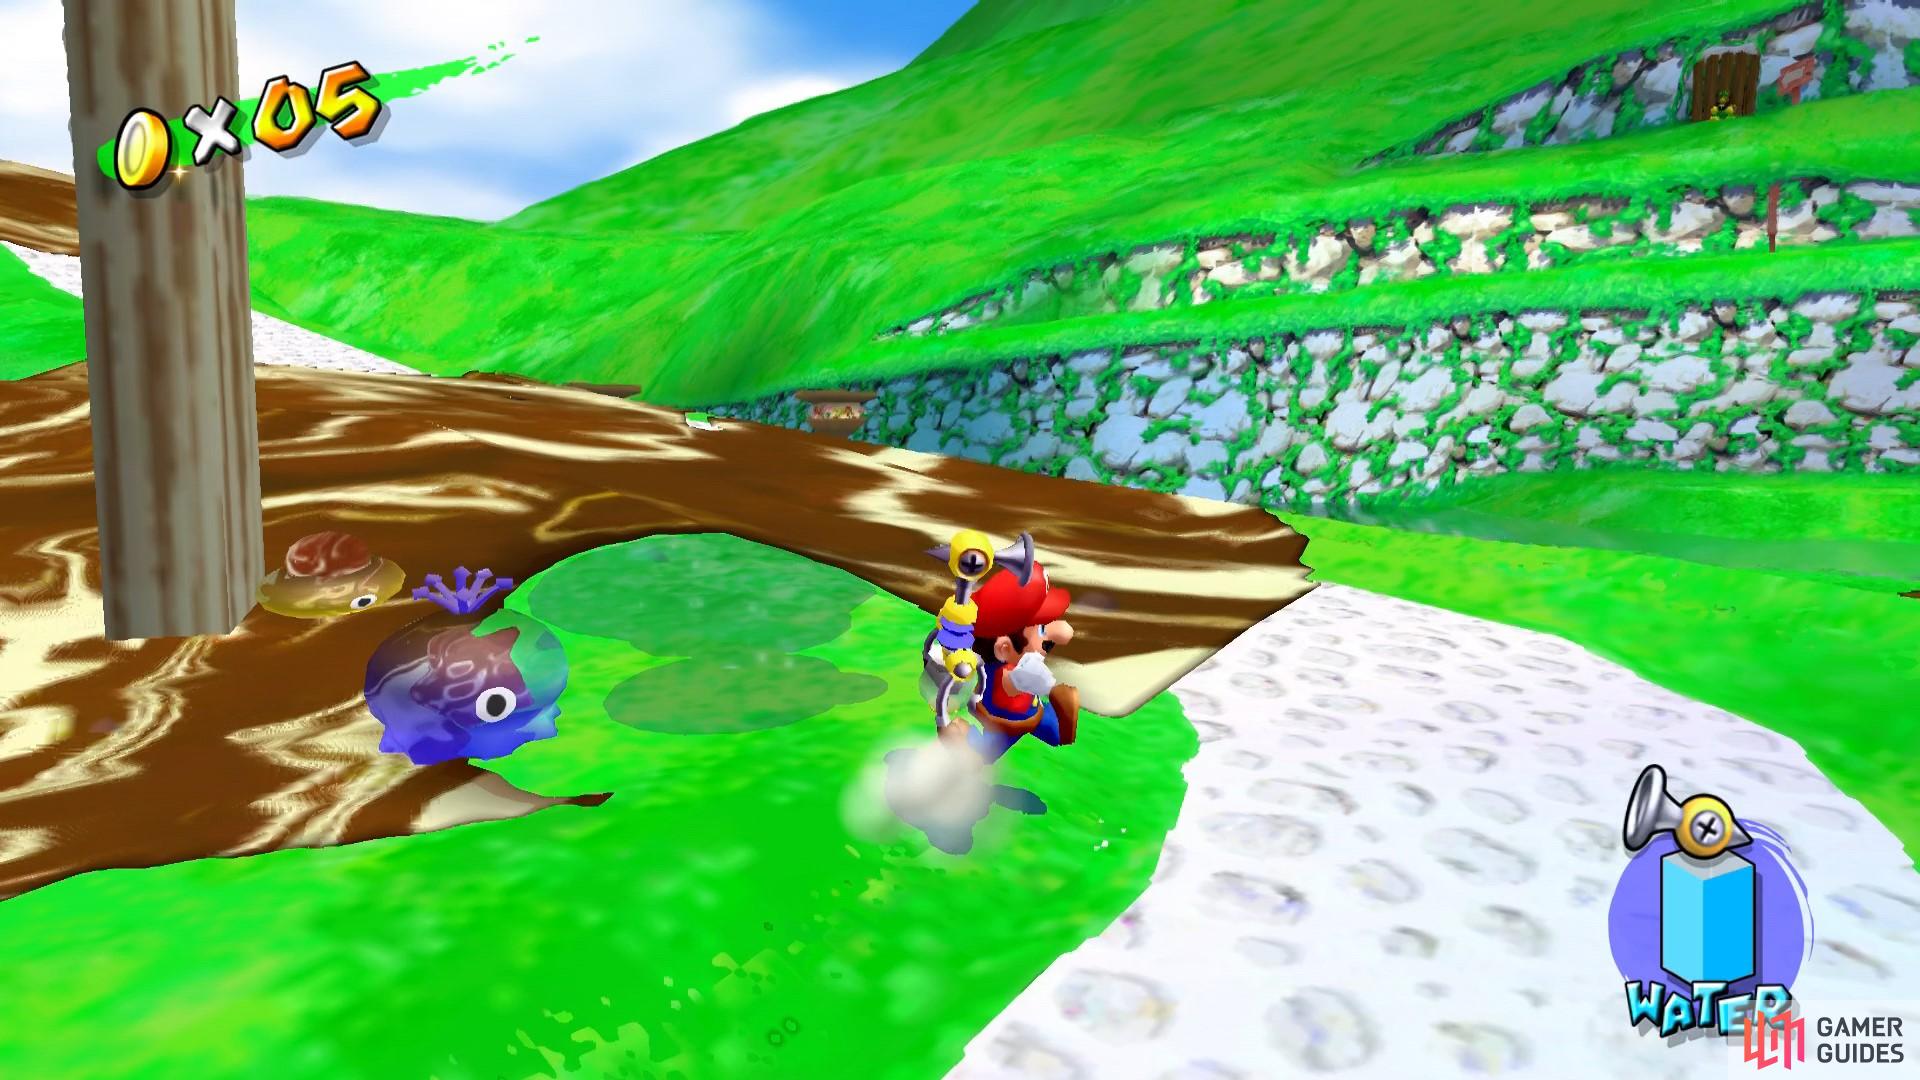 You can use the water shooters or the hover nozzles to clear the goo from the path.